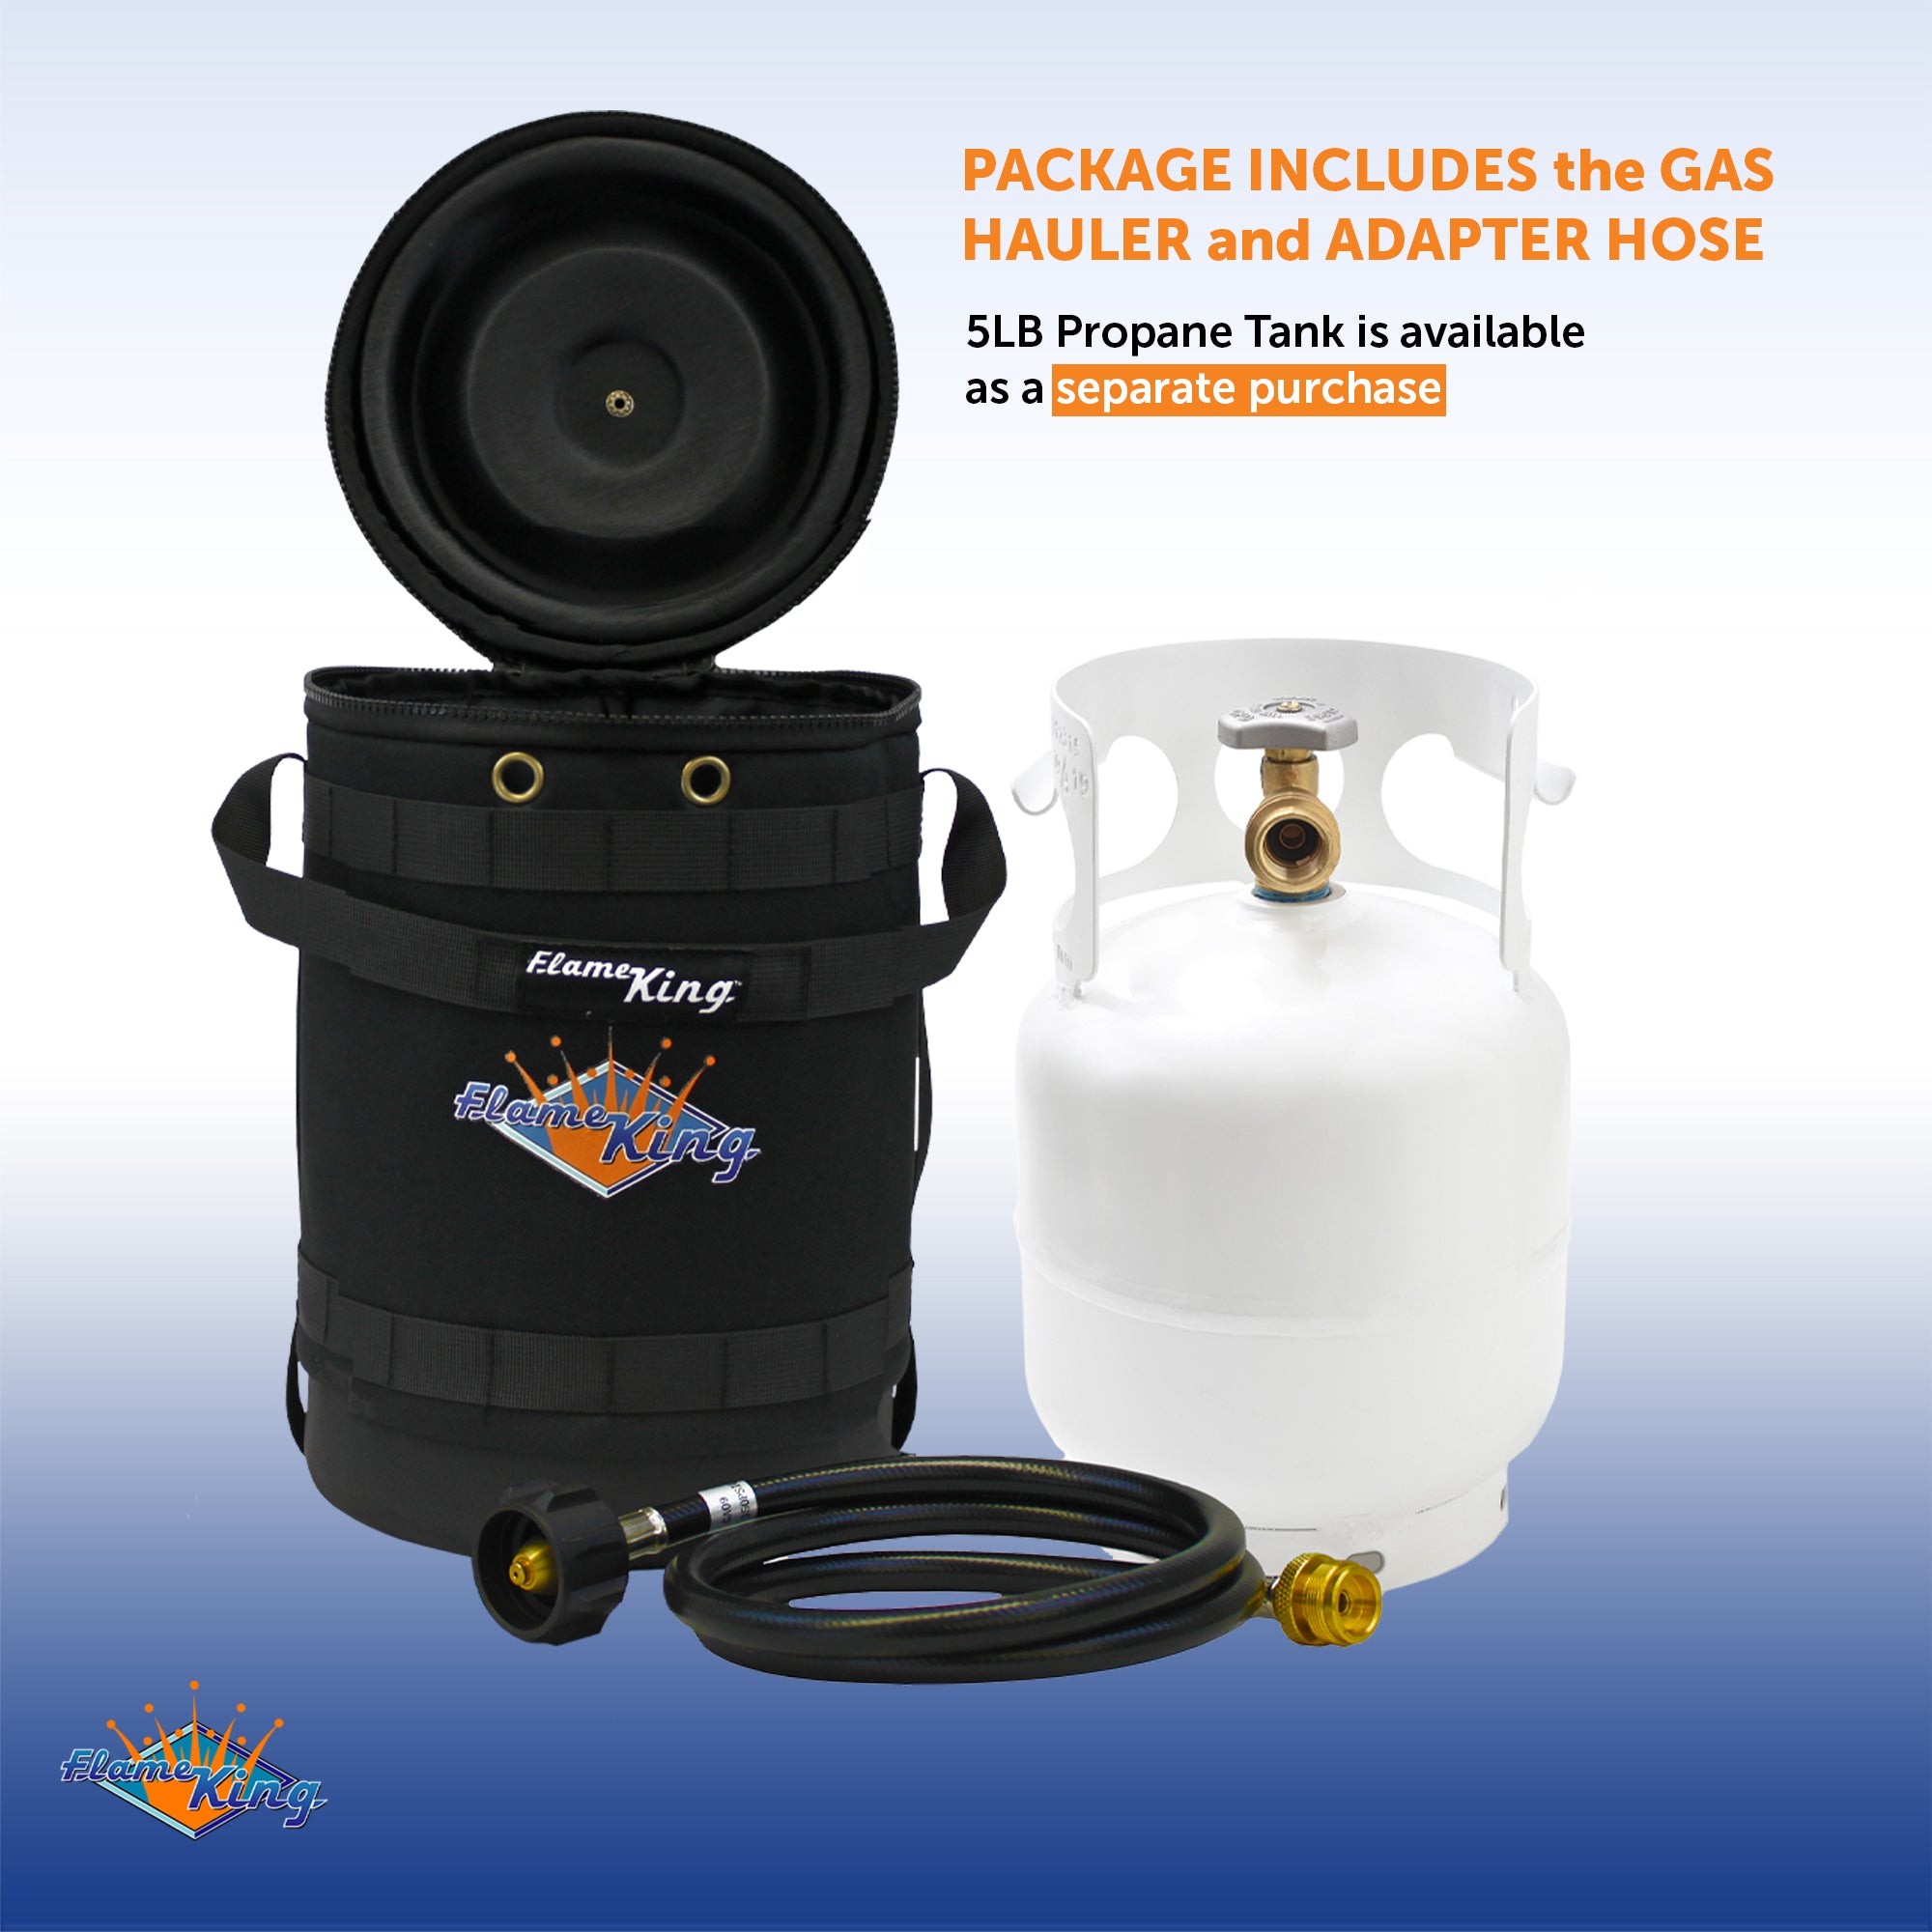 Flame King Propane Gas Hauler Kit-Insulated Protective Carry Case for 5lb Propane Tank plus Adapter Hose